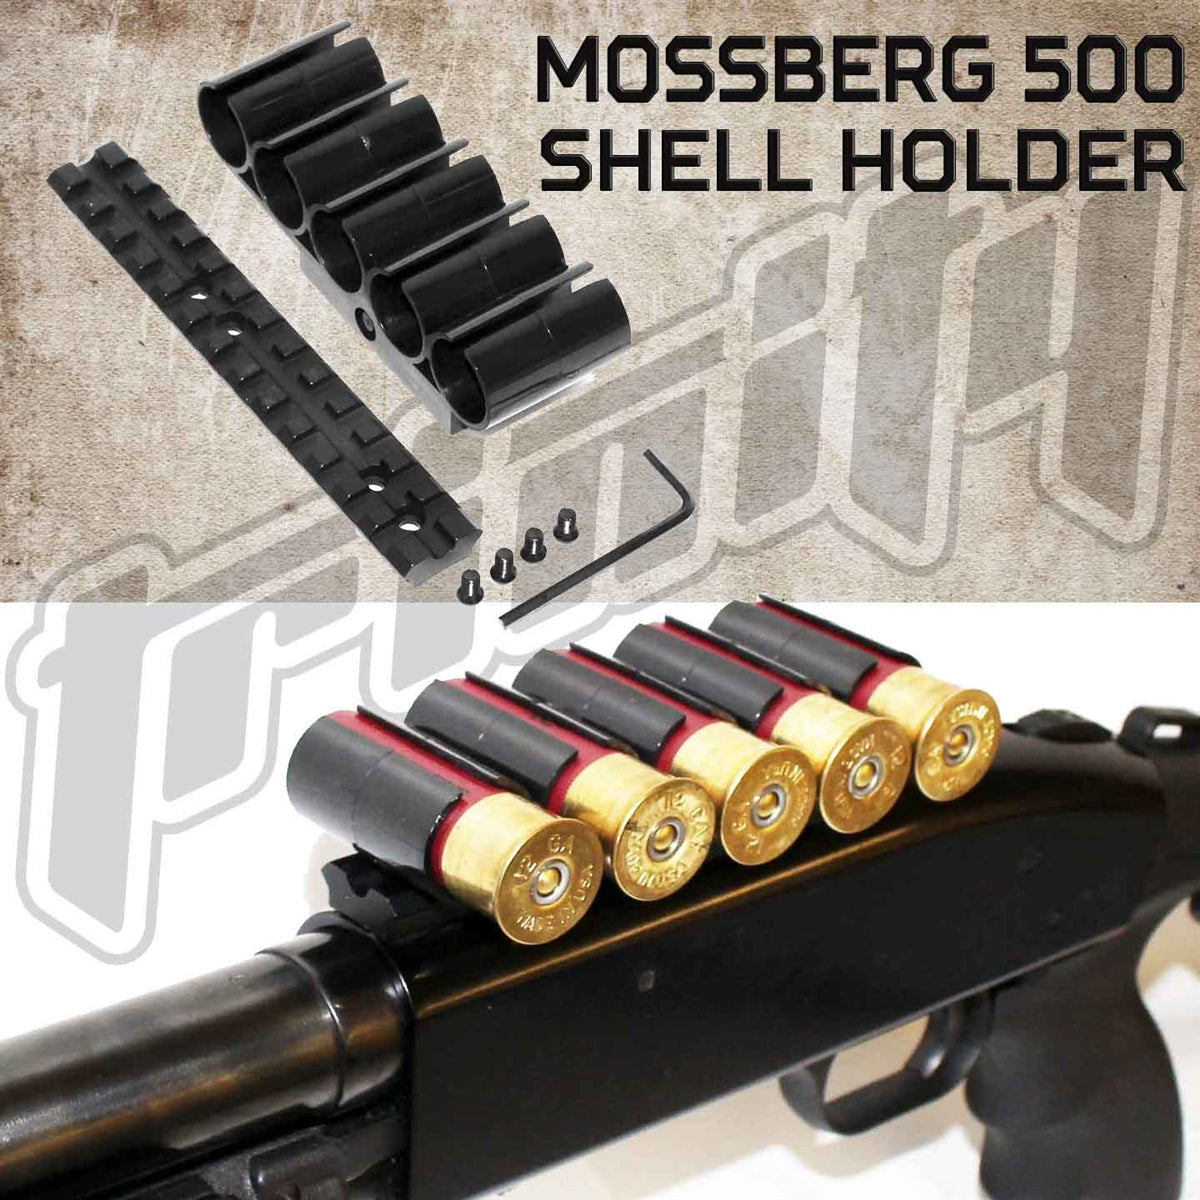 Trinity Polymer Shell Holder With Base Mount For Mossberg 590 12 Gauge Pump.